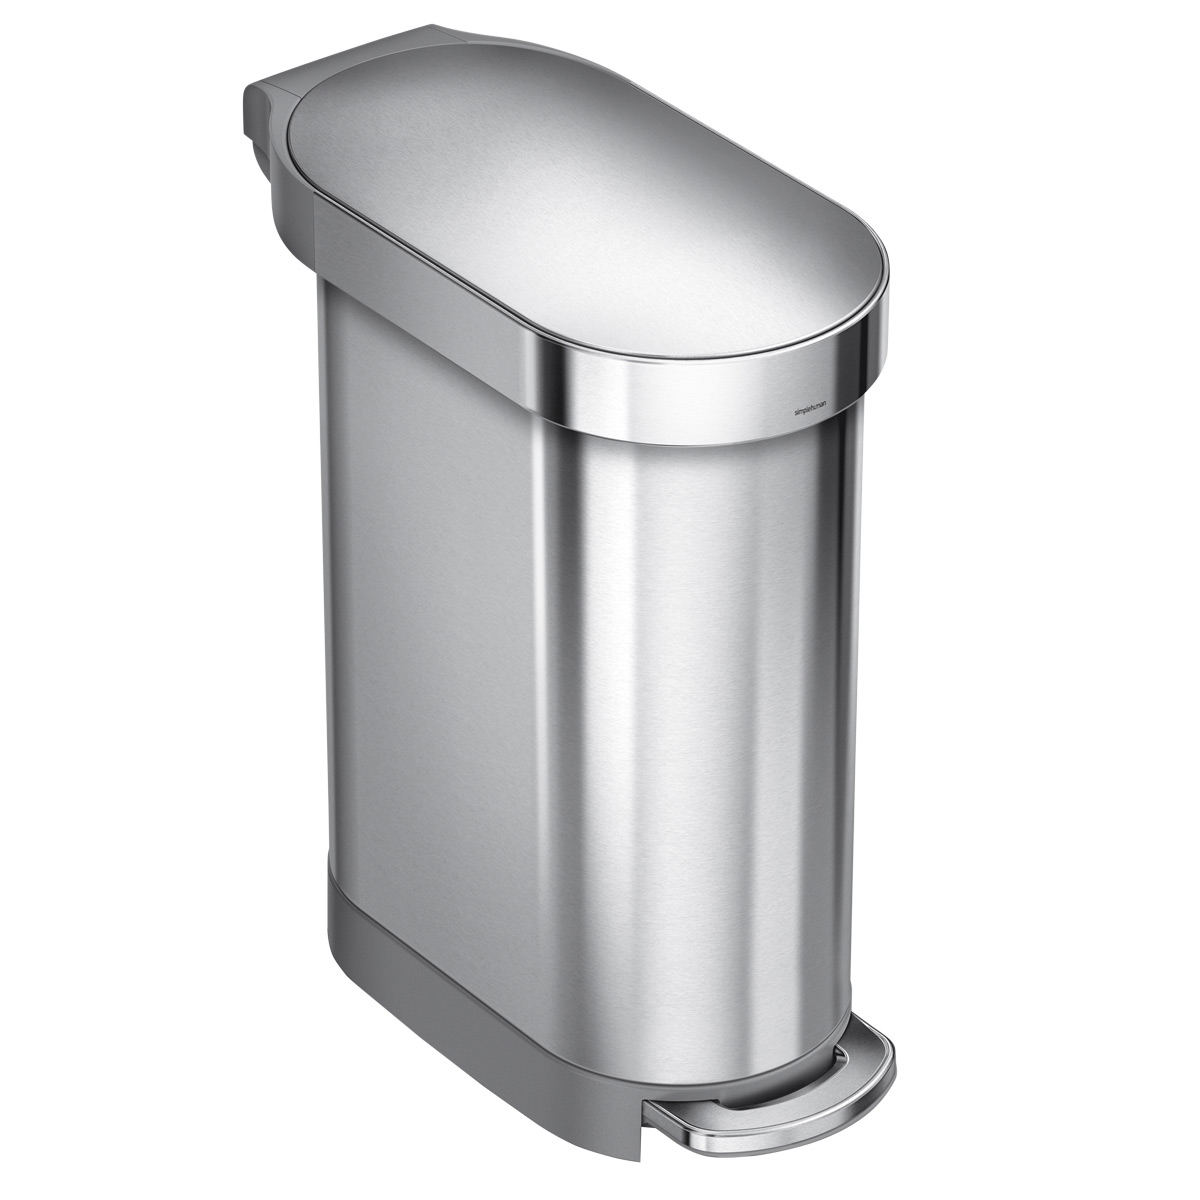 simplehuman Stainless Steel 12 gal./45L Step Trash Can | The Container Store